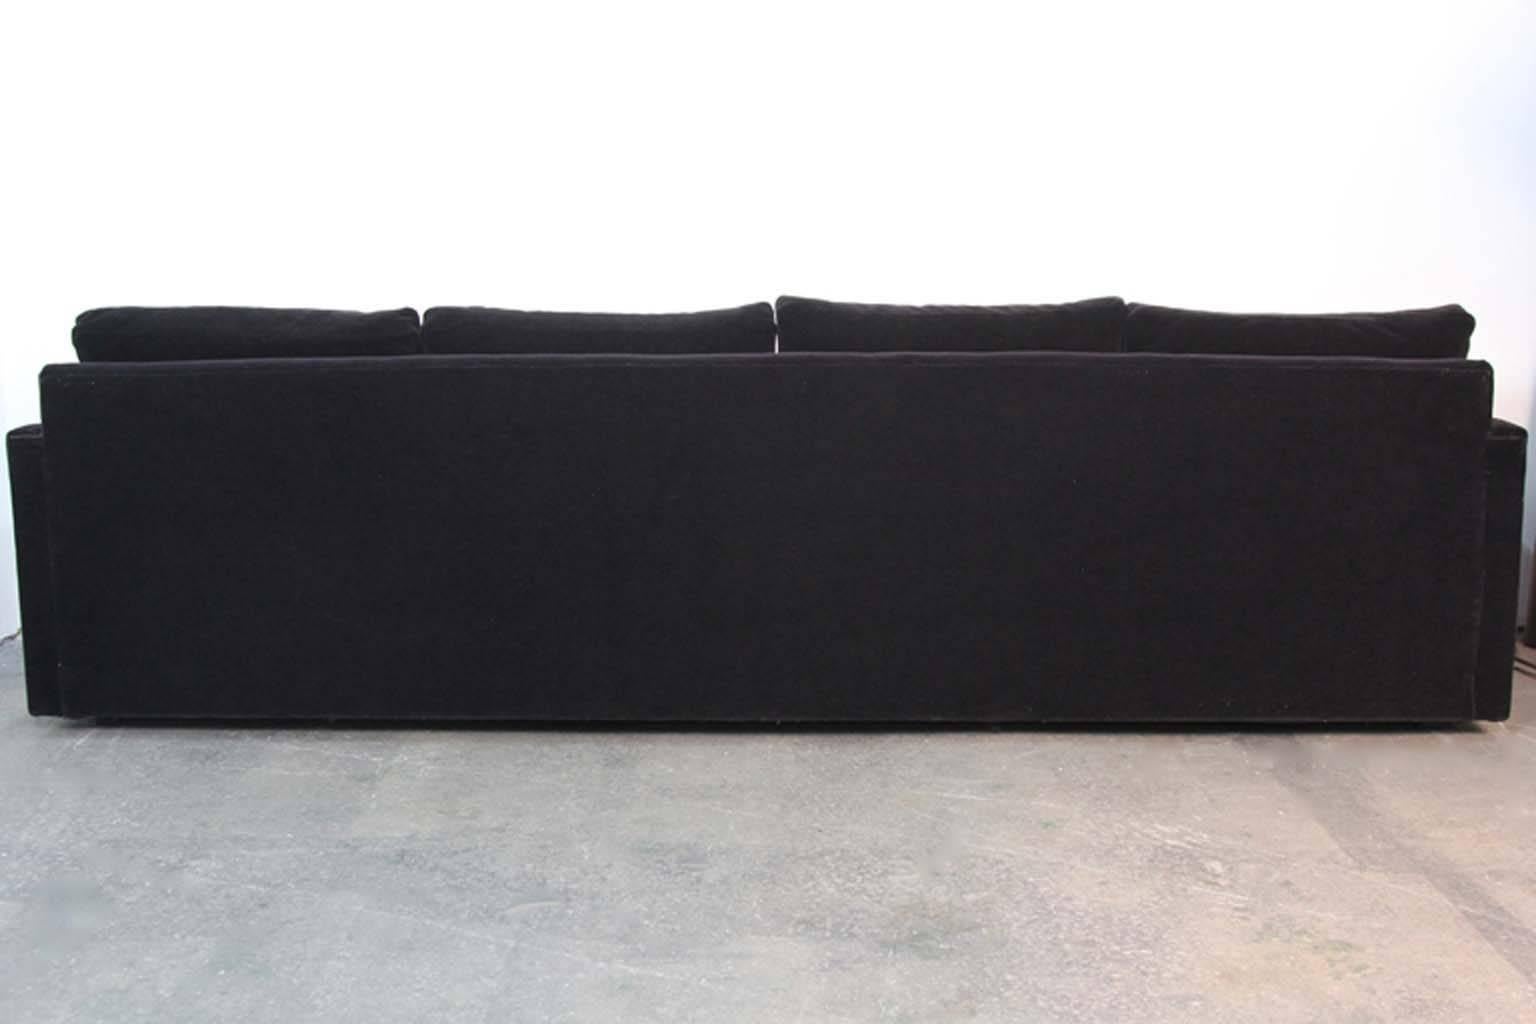 American Mid-Century Modern Tuxedo Style Four-Seat Sofa in Black Mohair For Sale